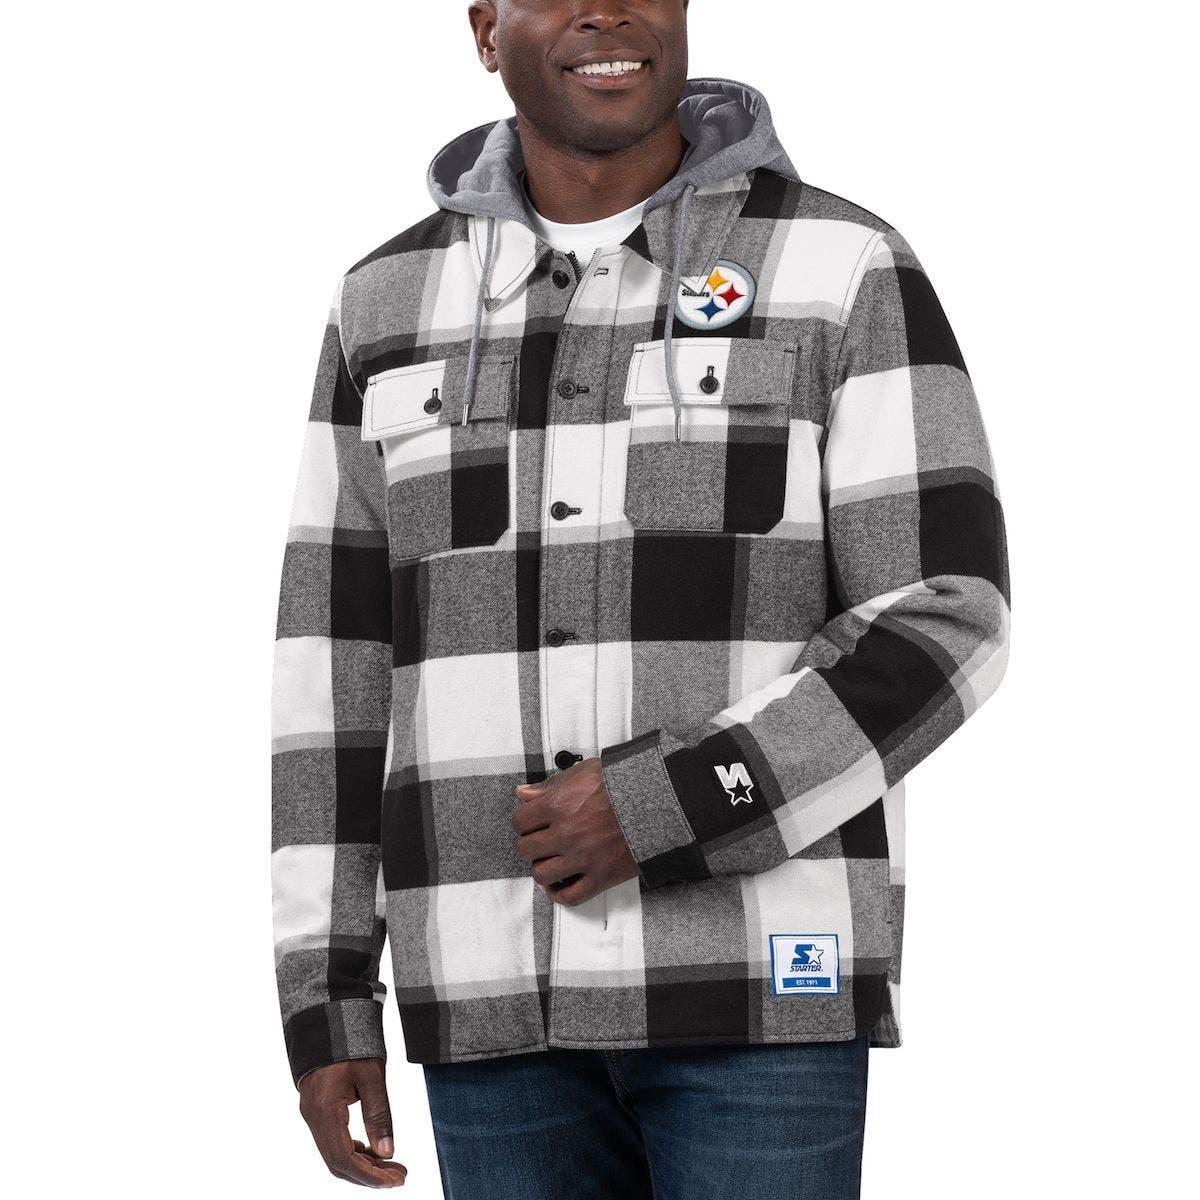 steelers big and tall clothing